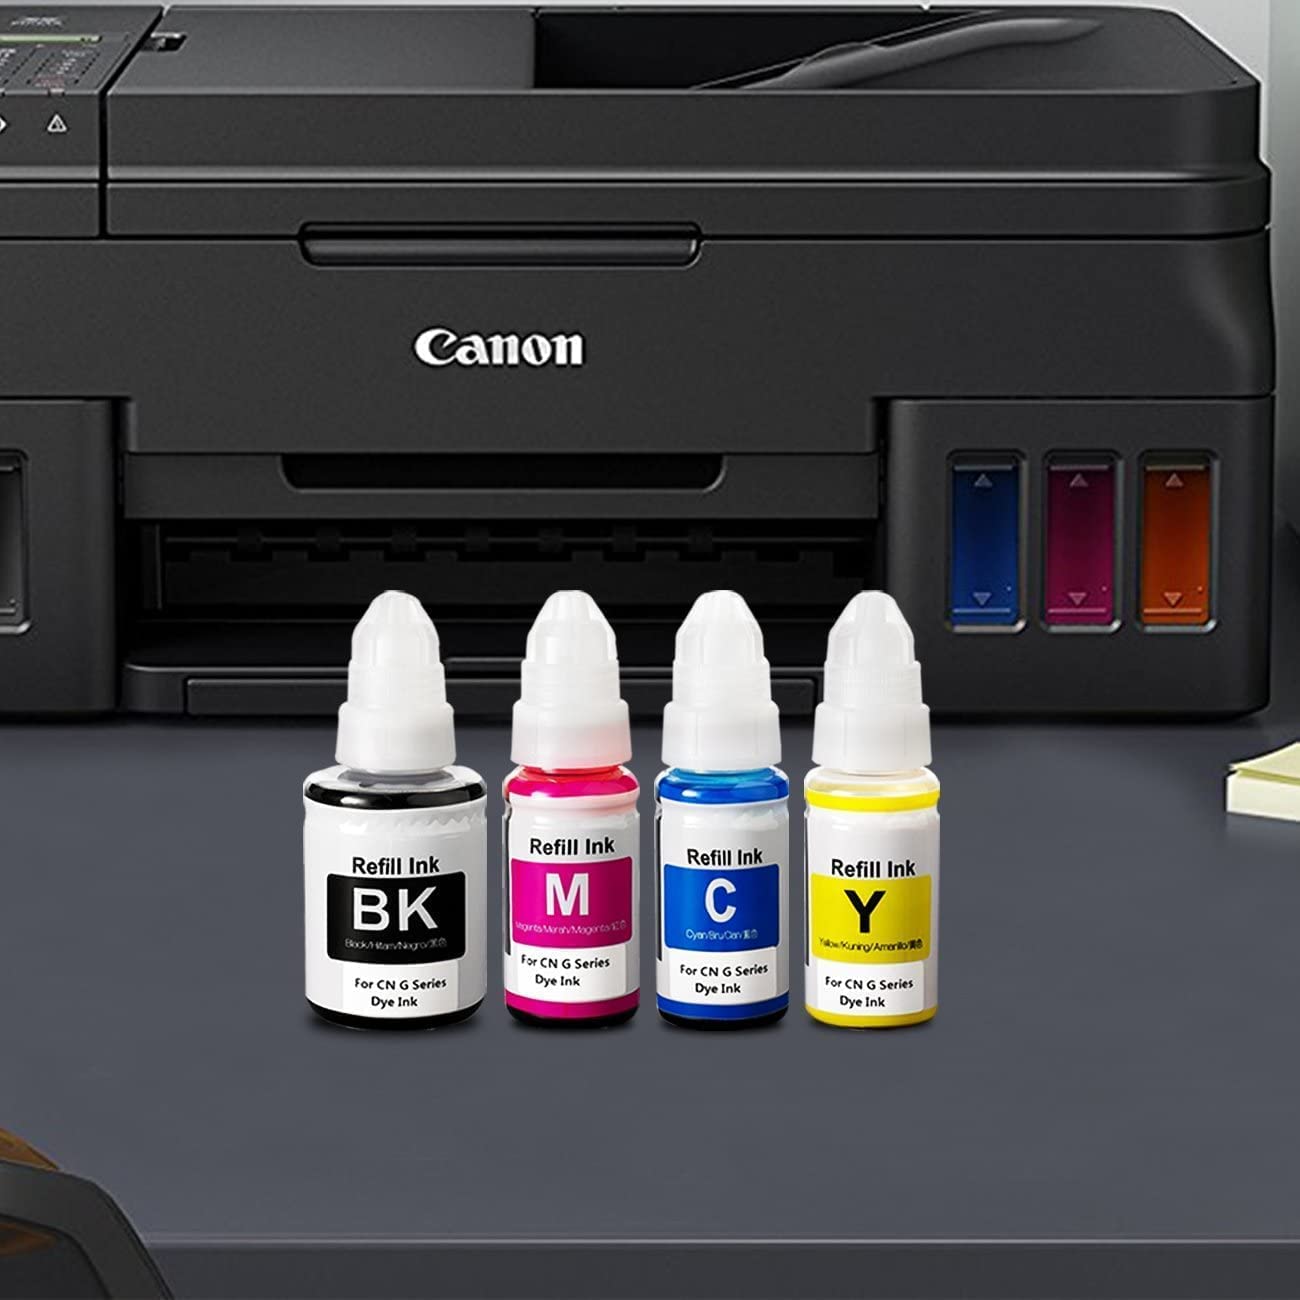 Printers Jack Compatible Canon GI-290 Refill Ink Bottle Kit for Canon